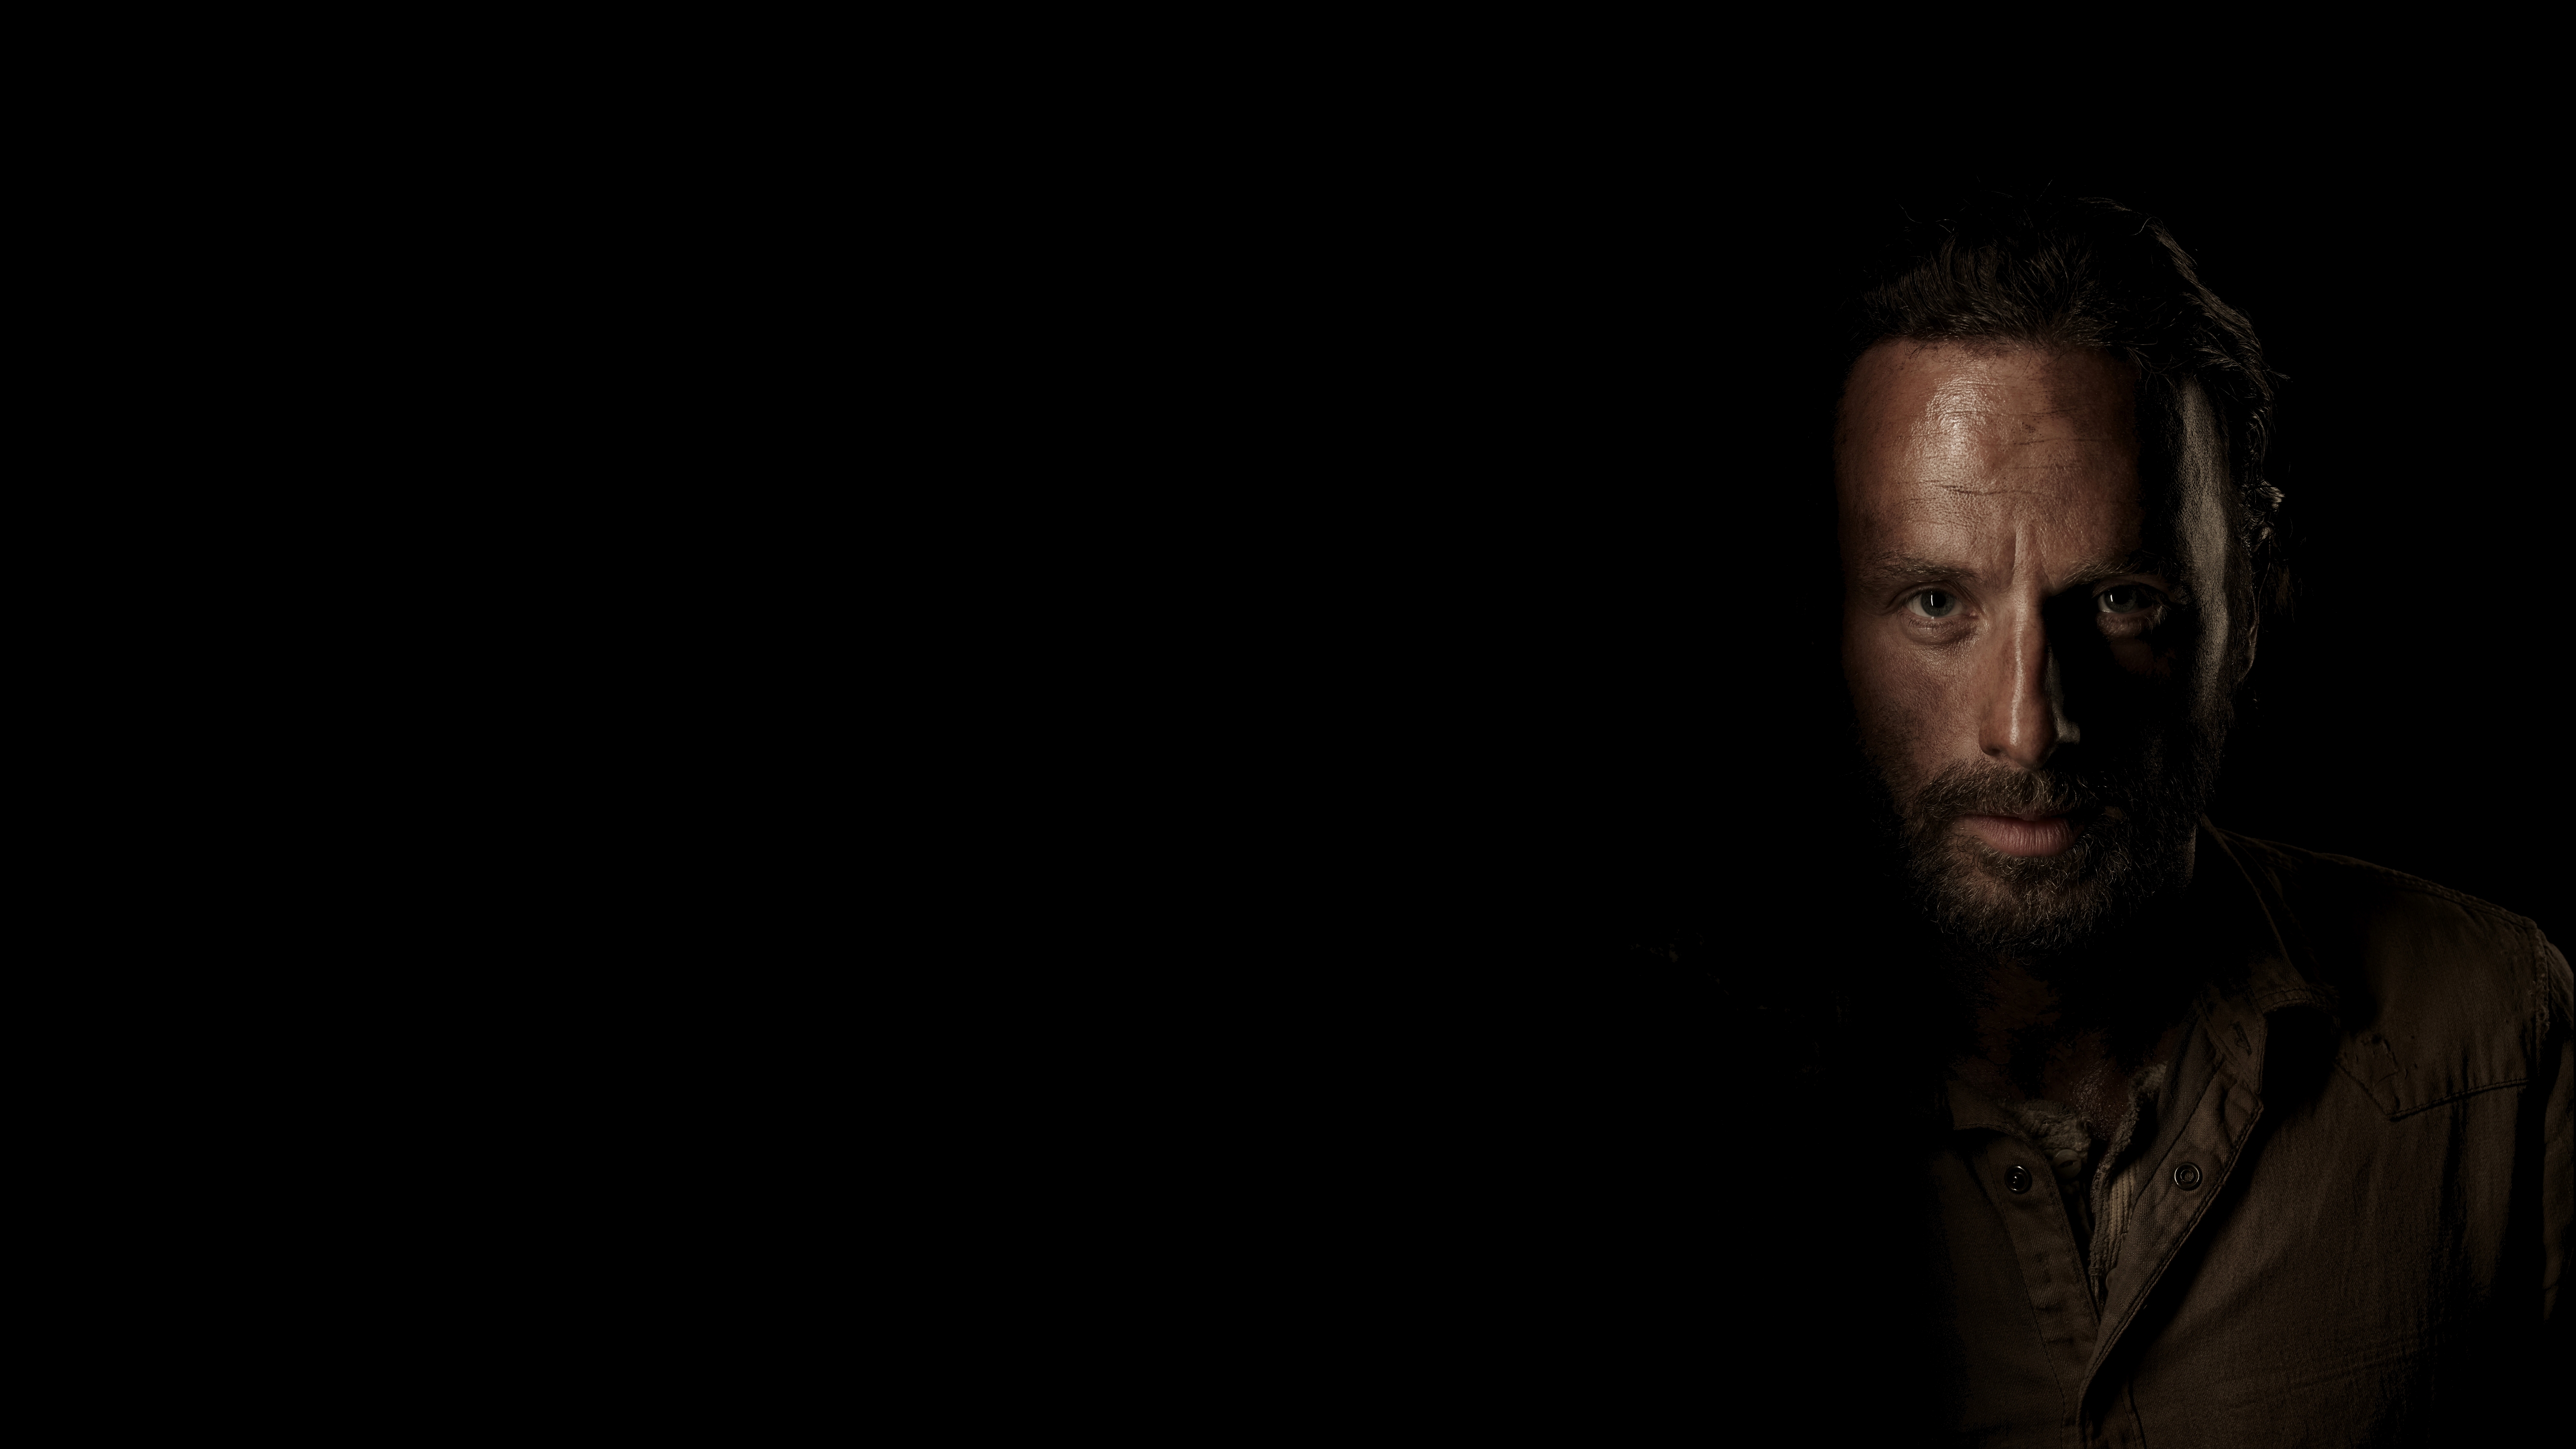 Wallpaper ID 362915  TV Show The Walking Dead Phone Wallpaper Andrew  Lincoln Rick Grimes 1080x2340 free download